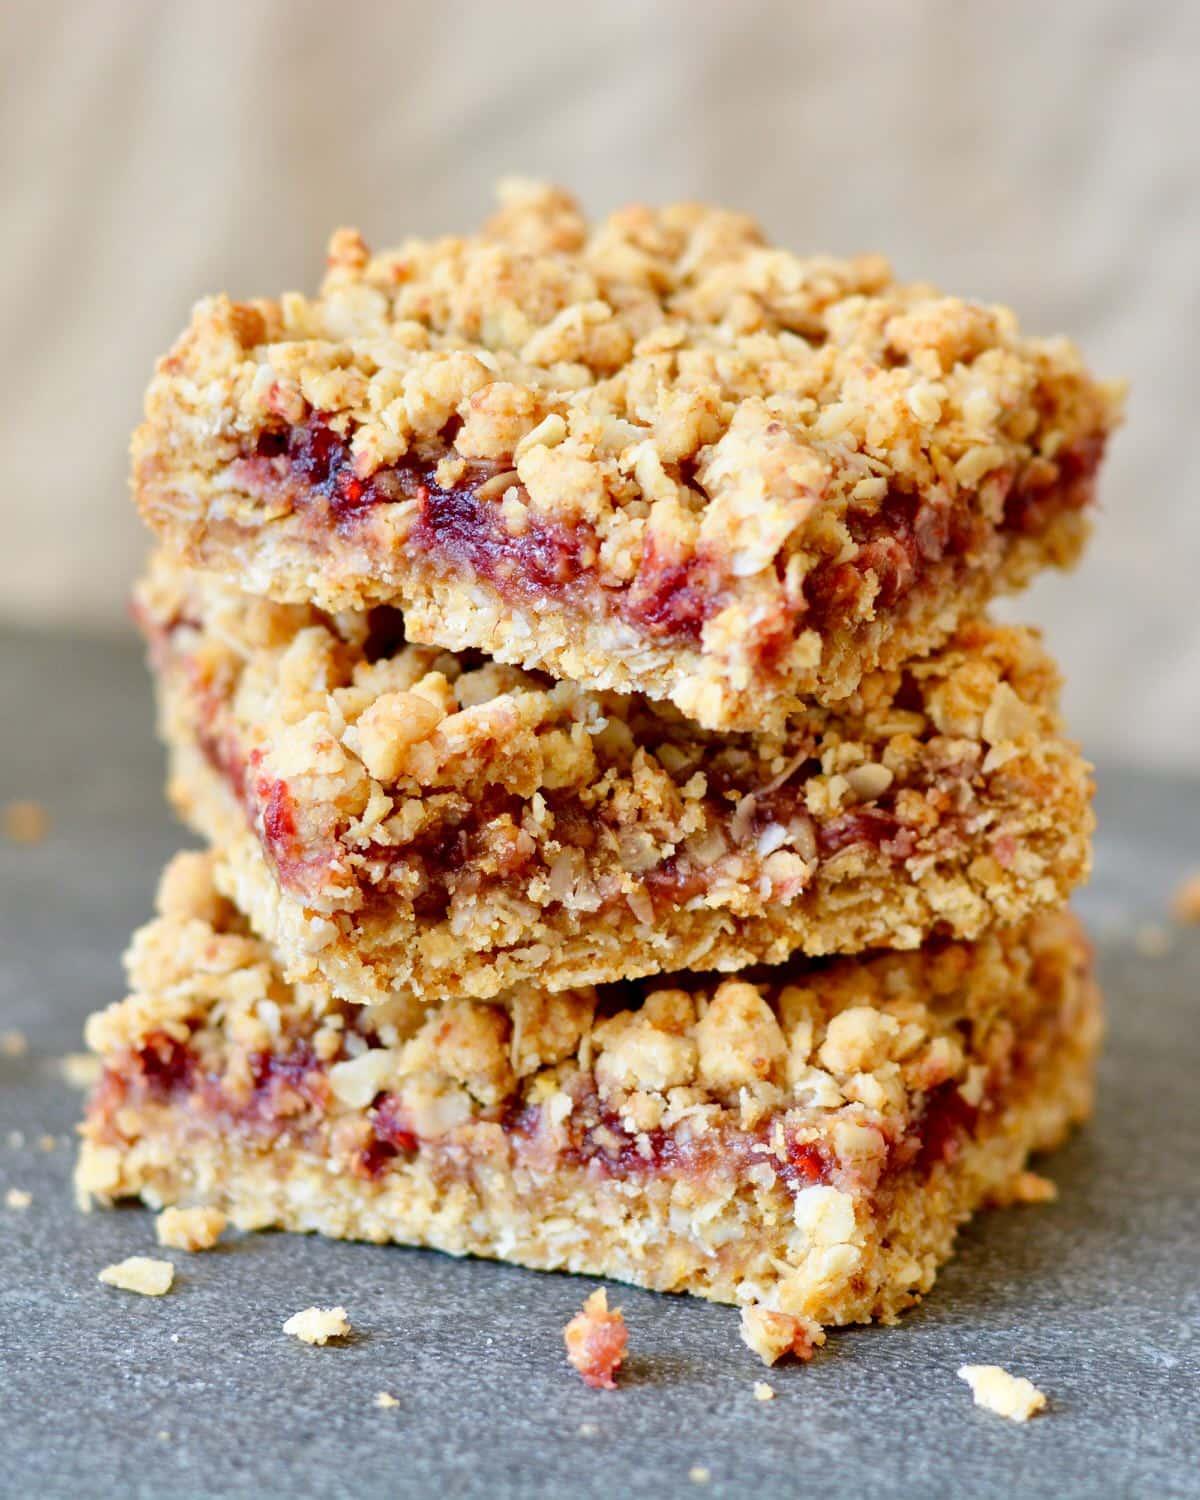 Low-Fat Cherry-Oatmeal Squares